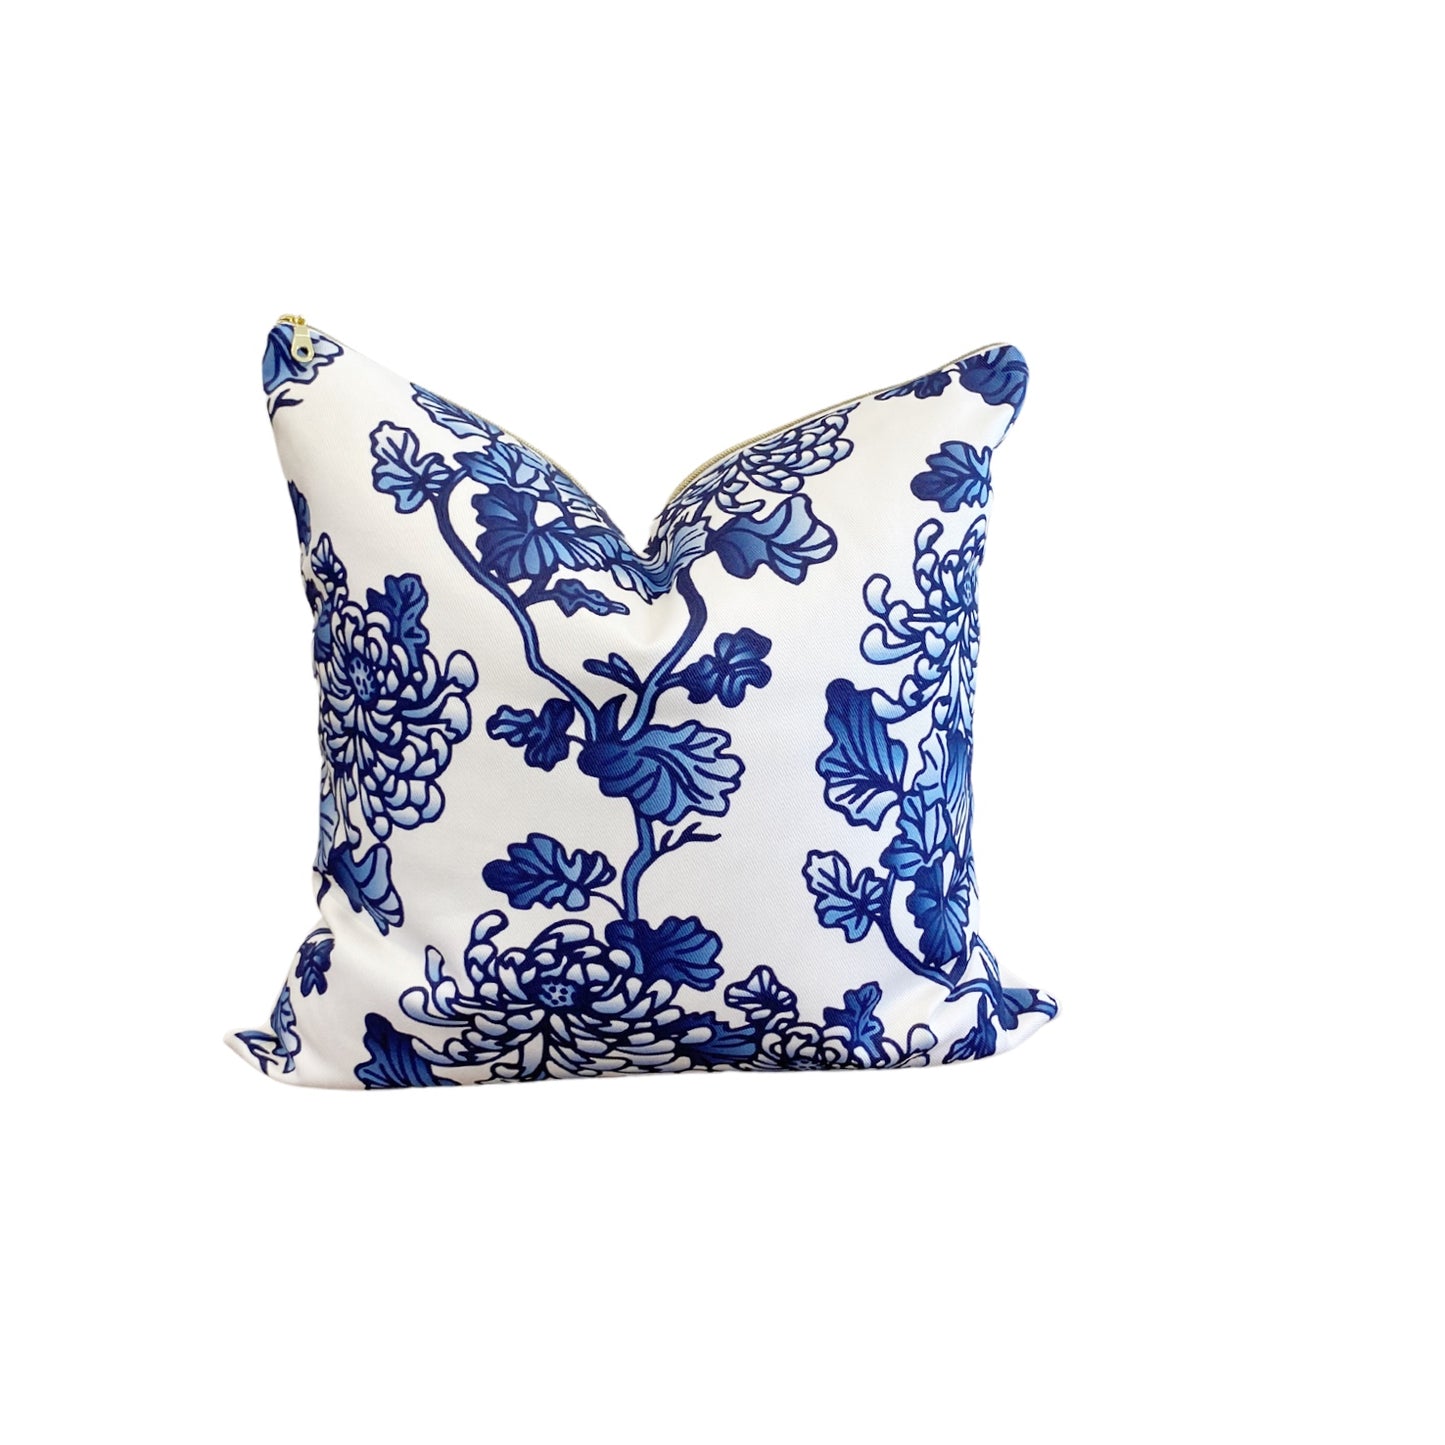 Chinoiserie Blue and White Floral Pillow Cover